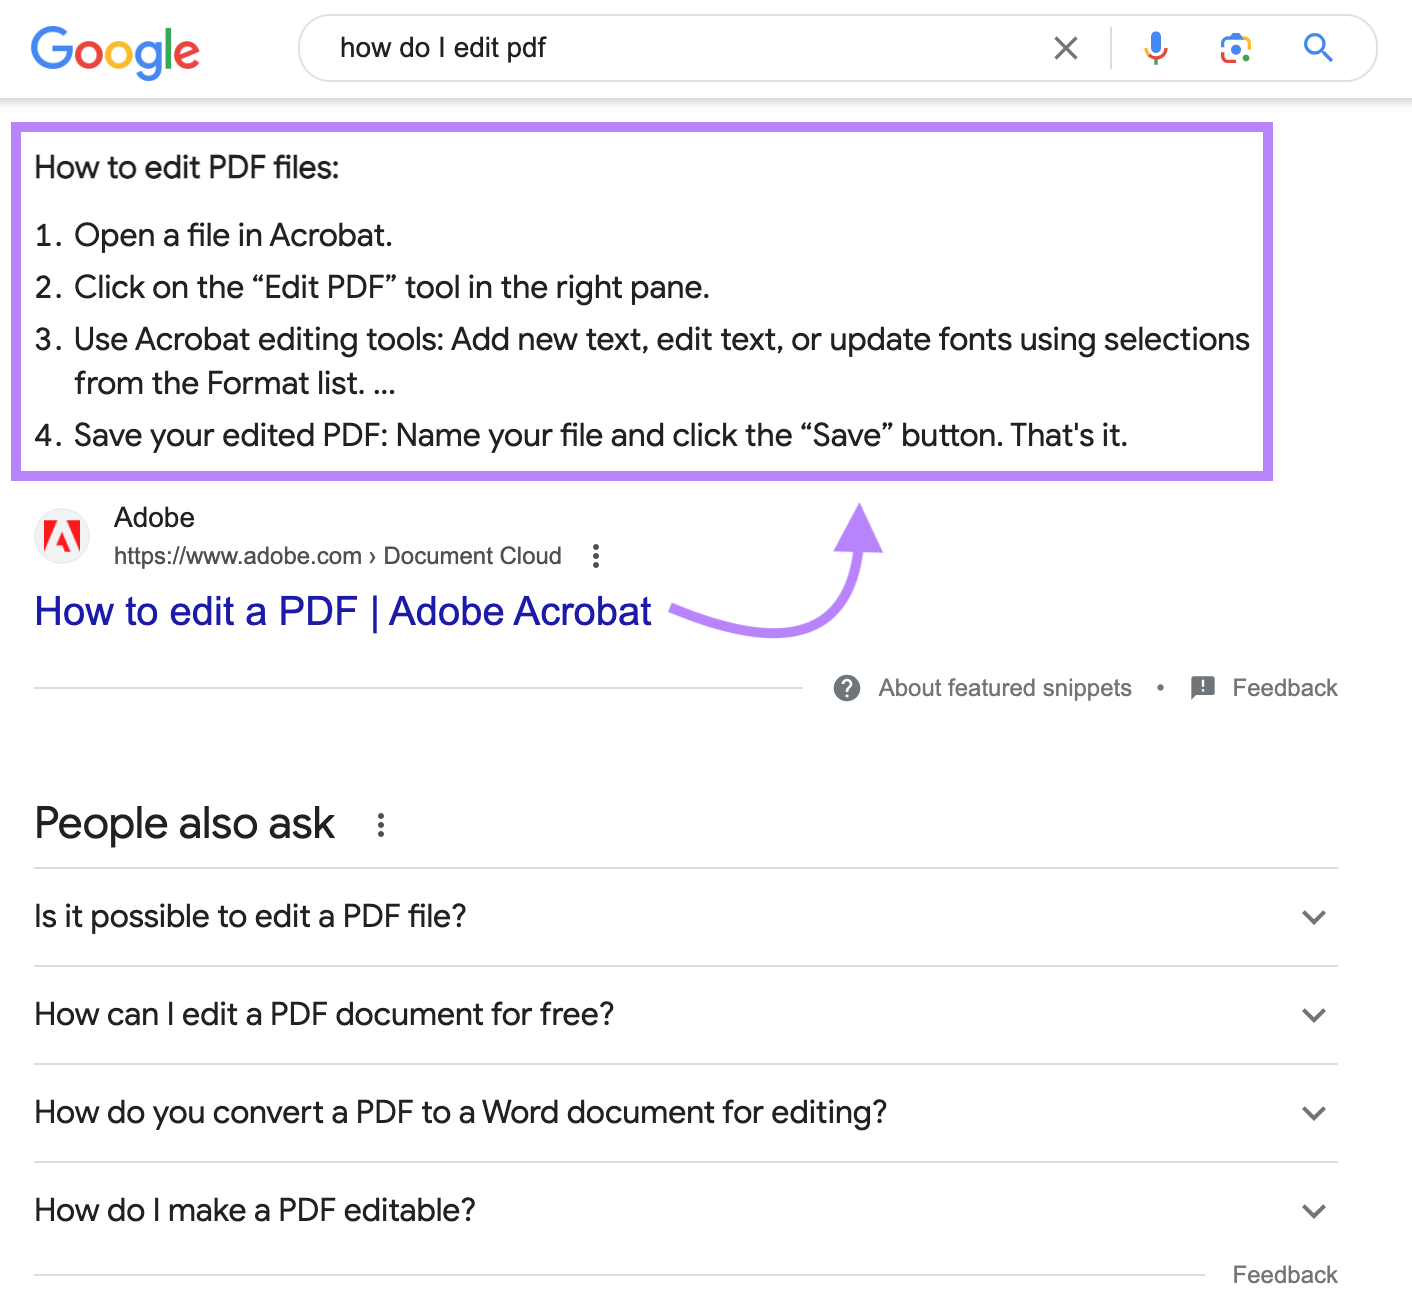 an example of featured snippet from Adobe in Google SERP for "،w do i edit pdf"